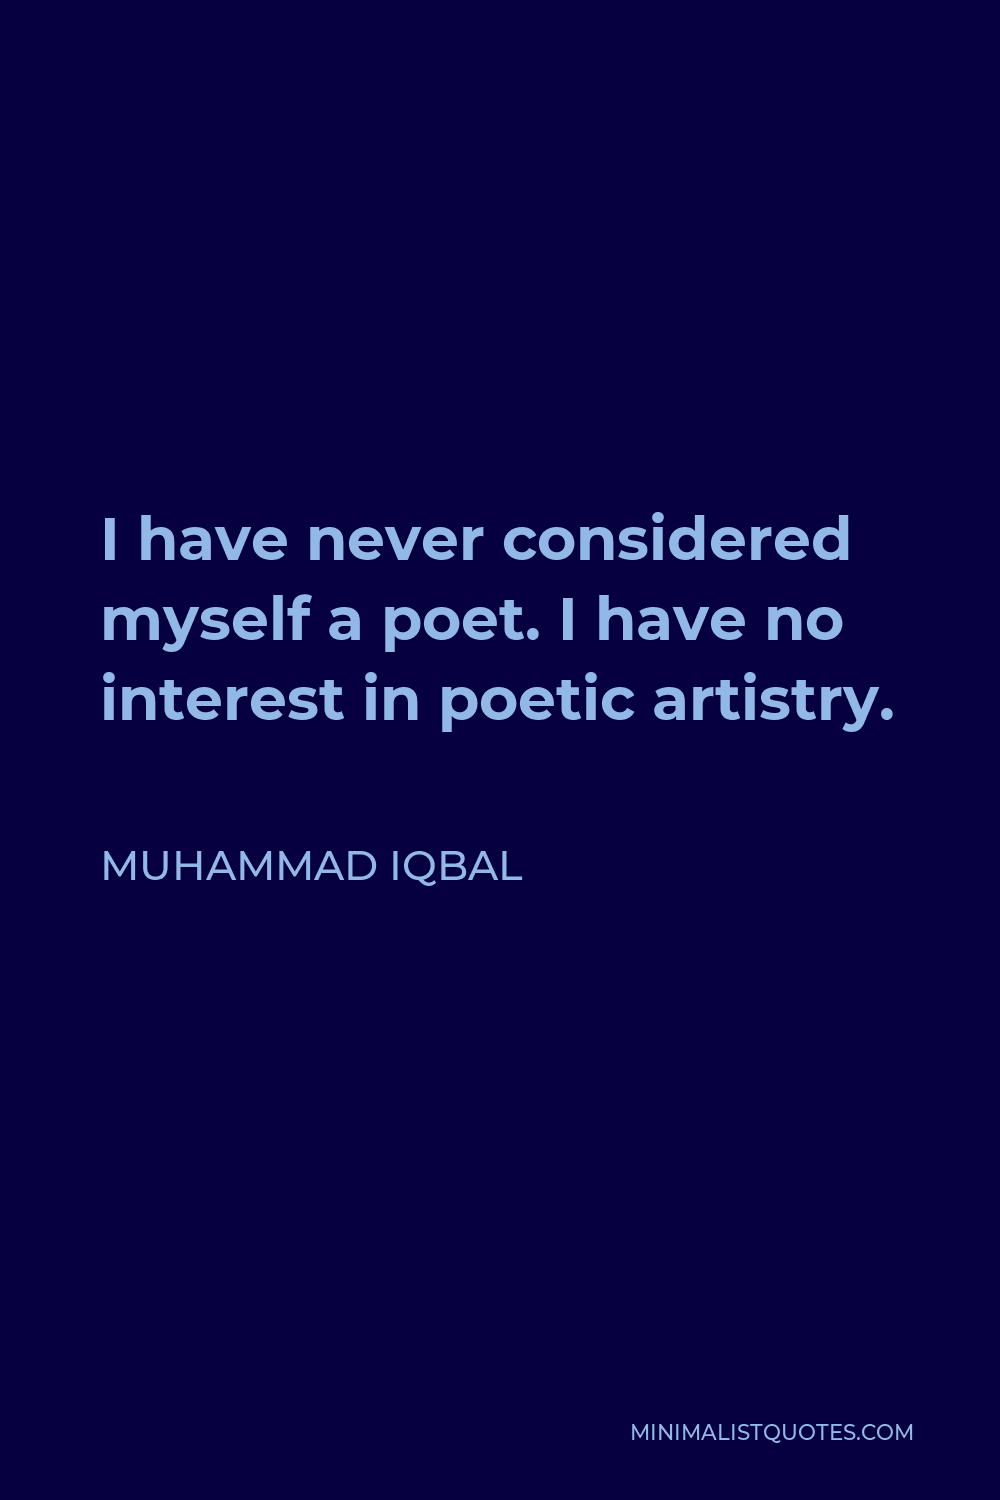 Muhammad Iqbal Quote - I have never considered myself a poet. I have no interest in poetic artistry.